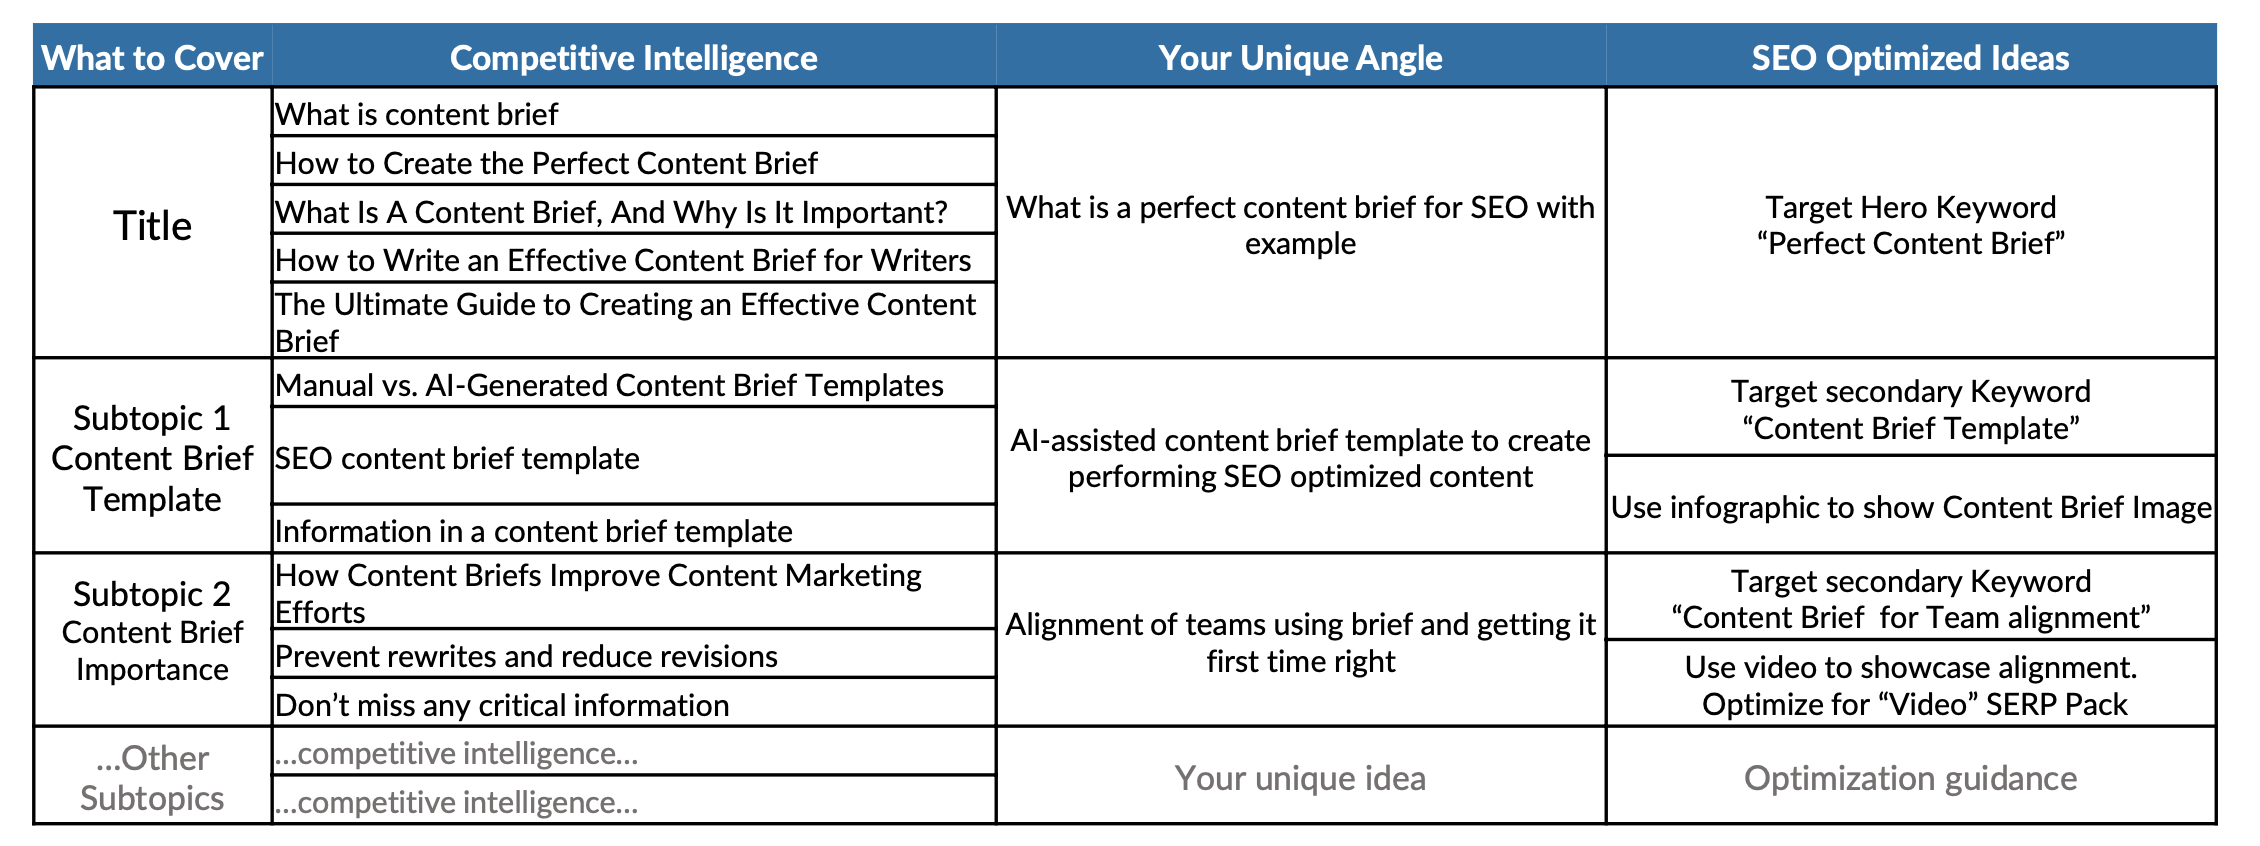 How we create the perfect SEO brief that aligns teams and beats the competition